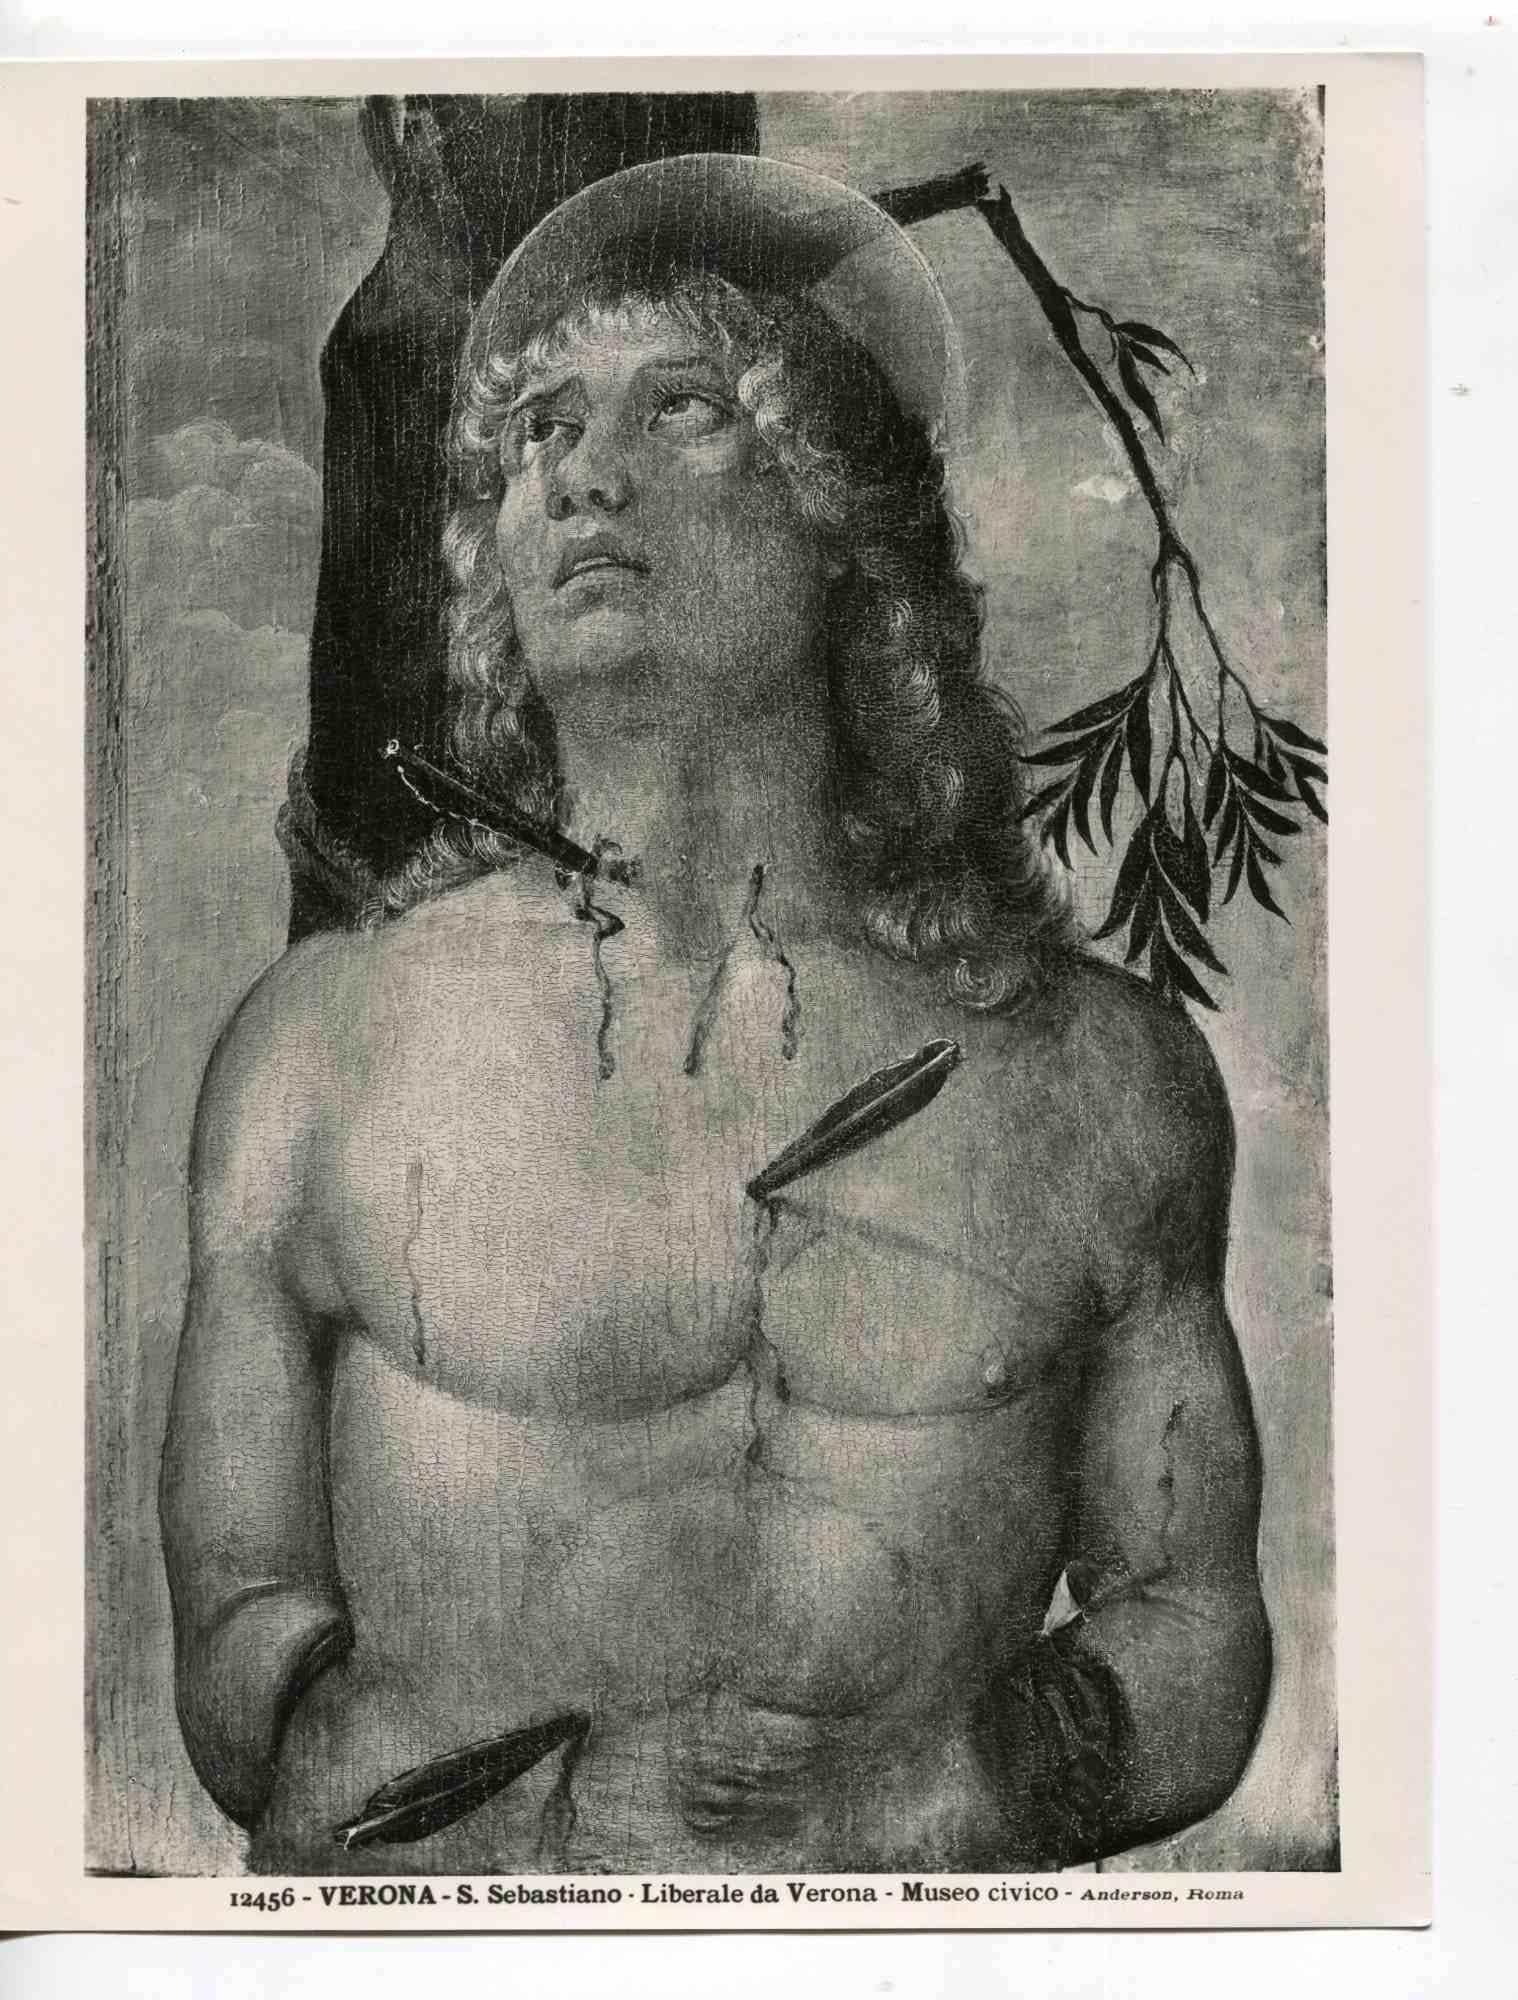 Unknown Black and White Photograph - St. Sebastian - Vintage Photo Detail - Early 20th Century